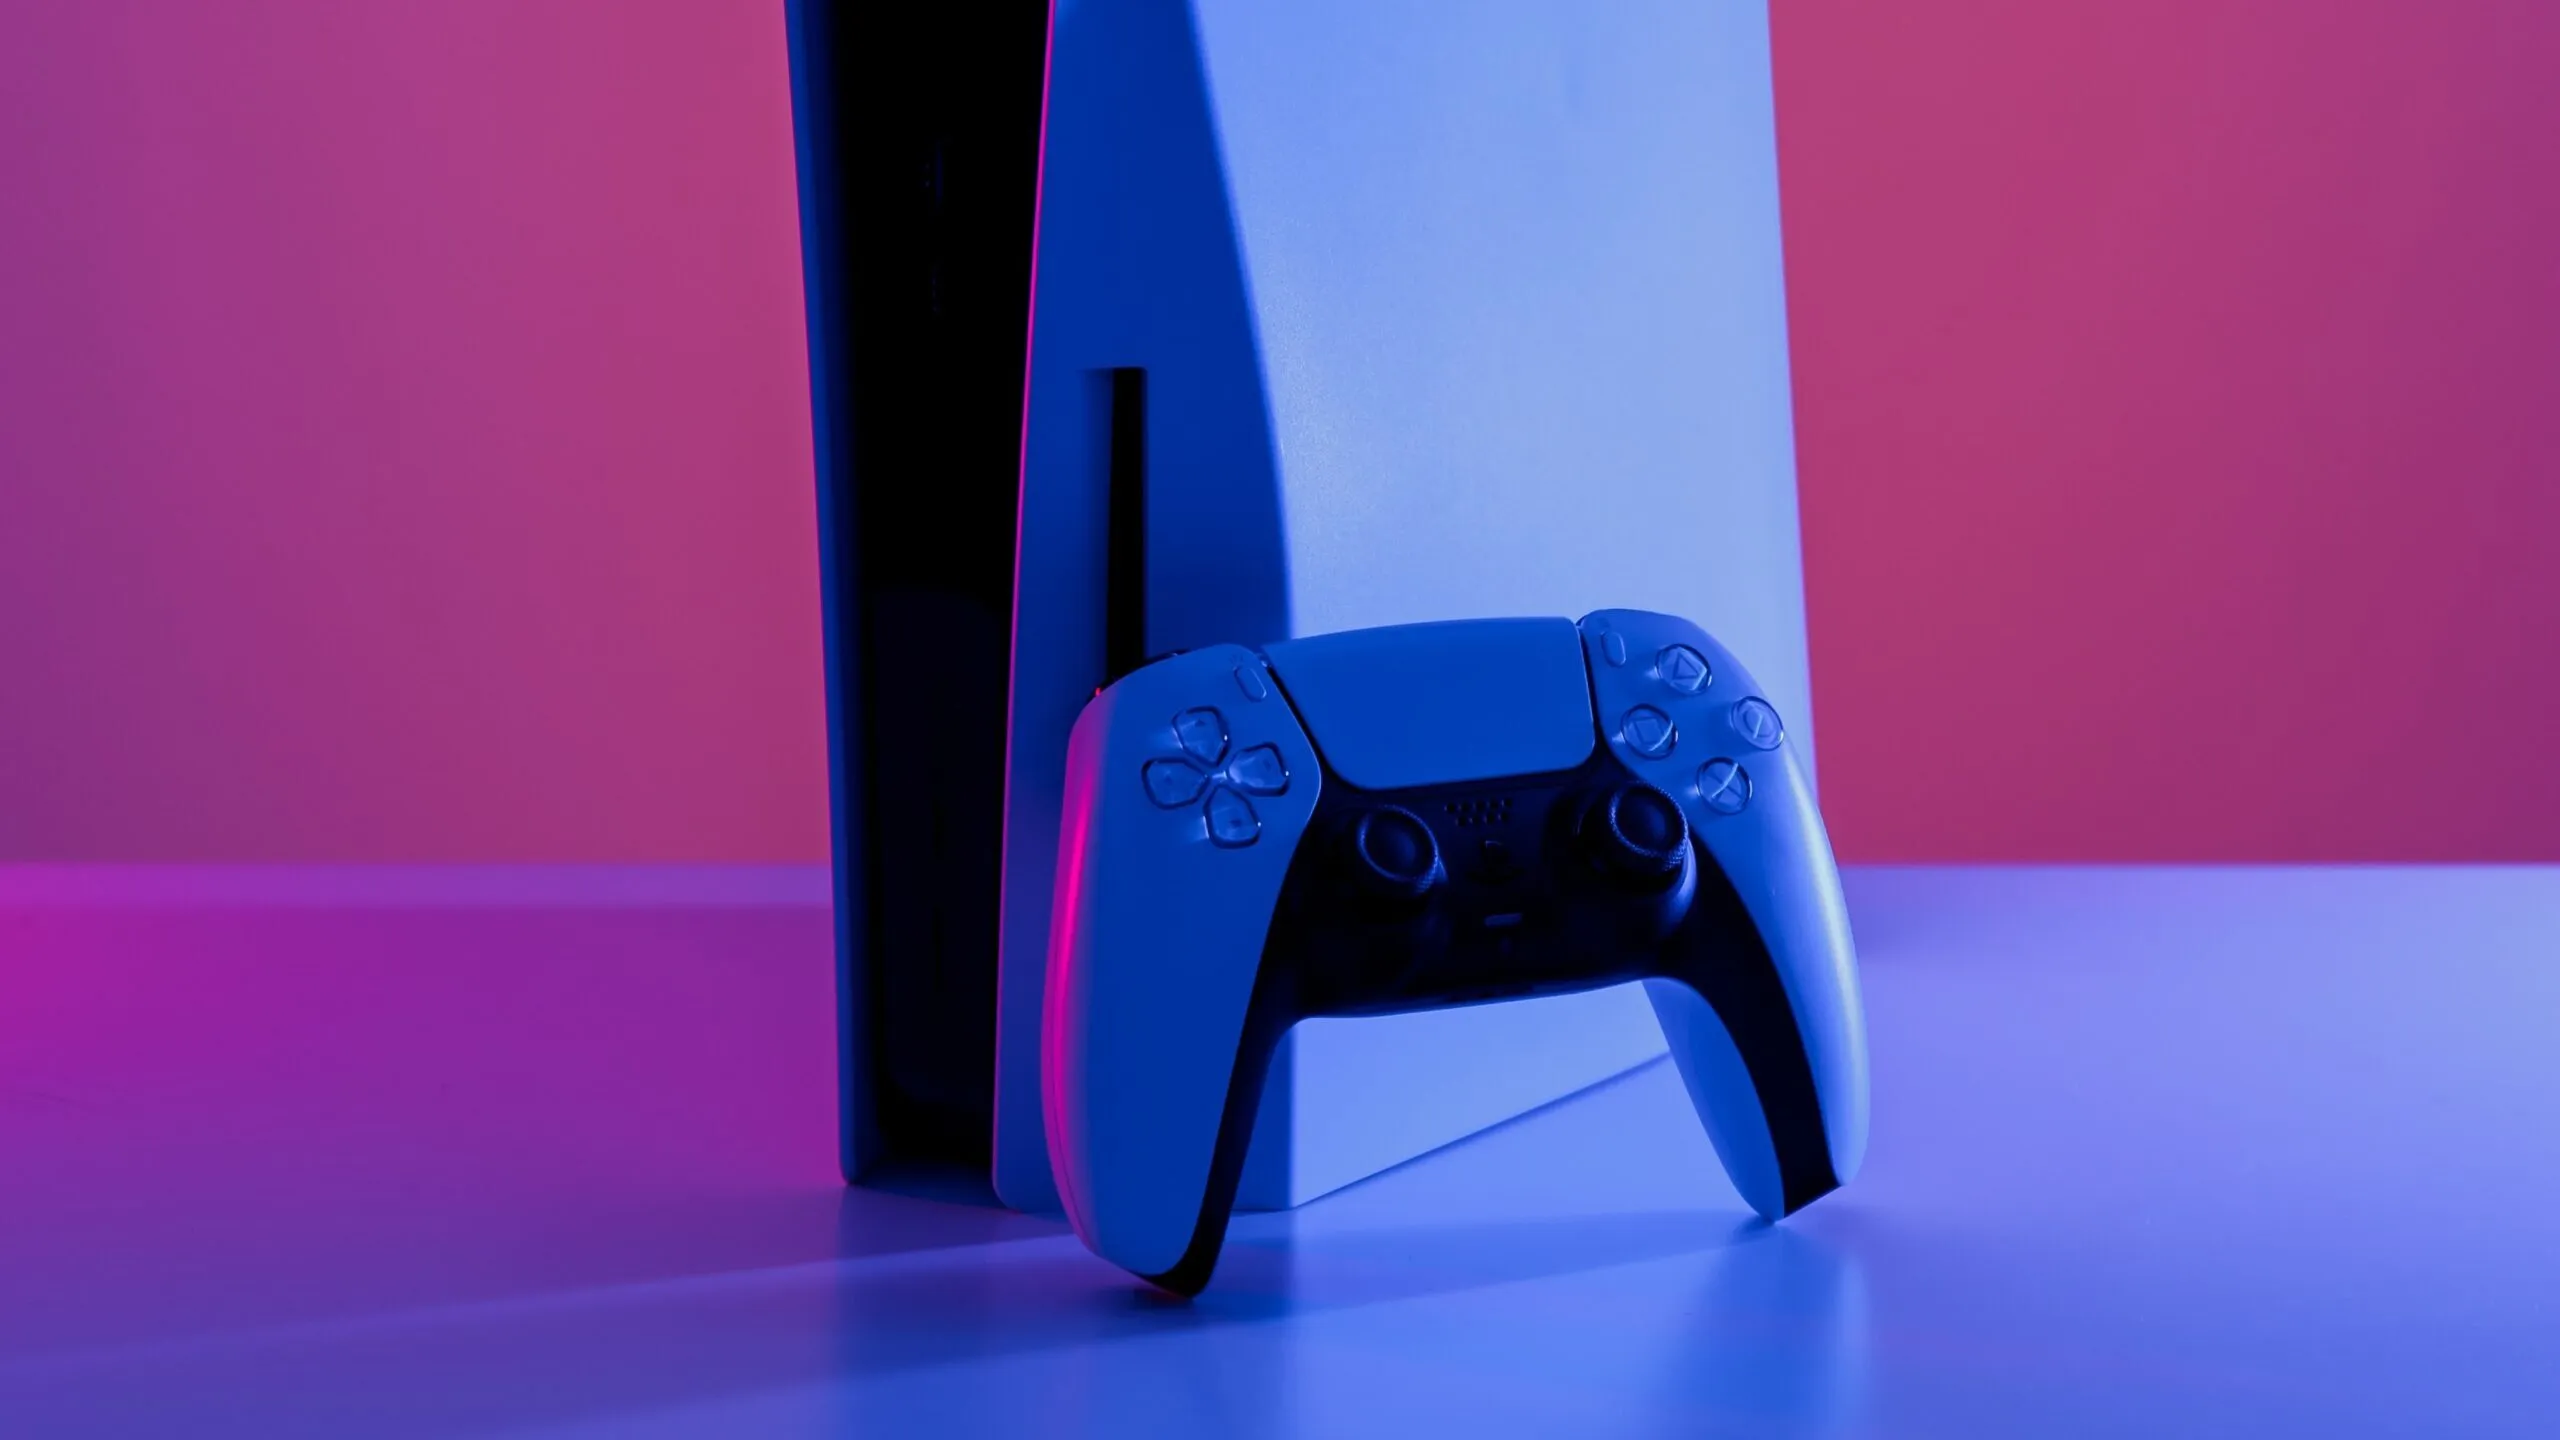 PlayStation 4 -- Neo Project